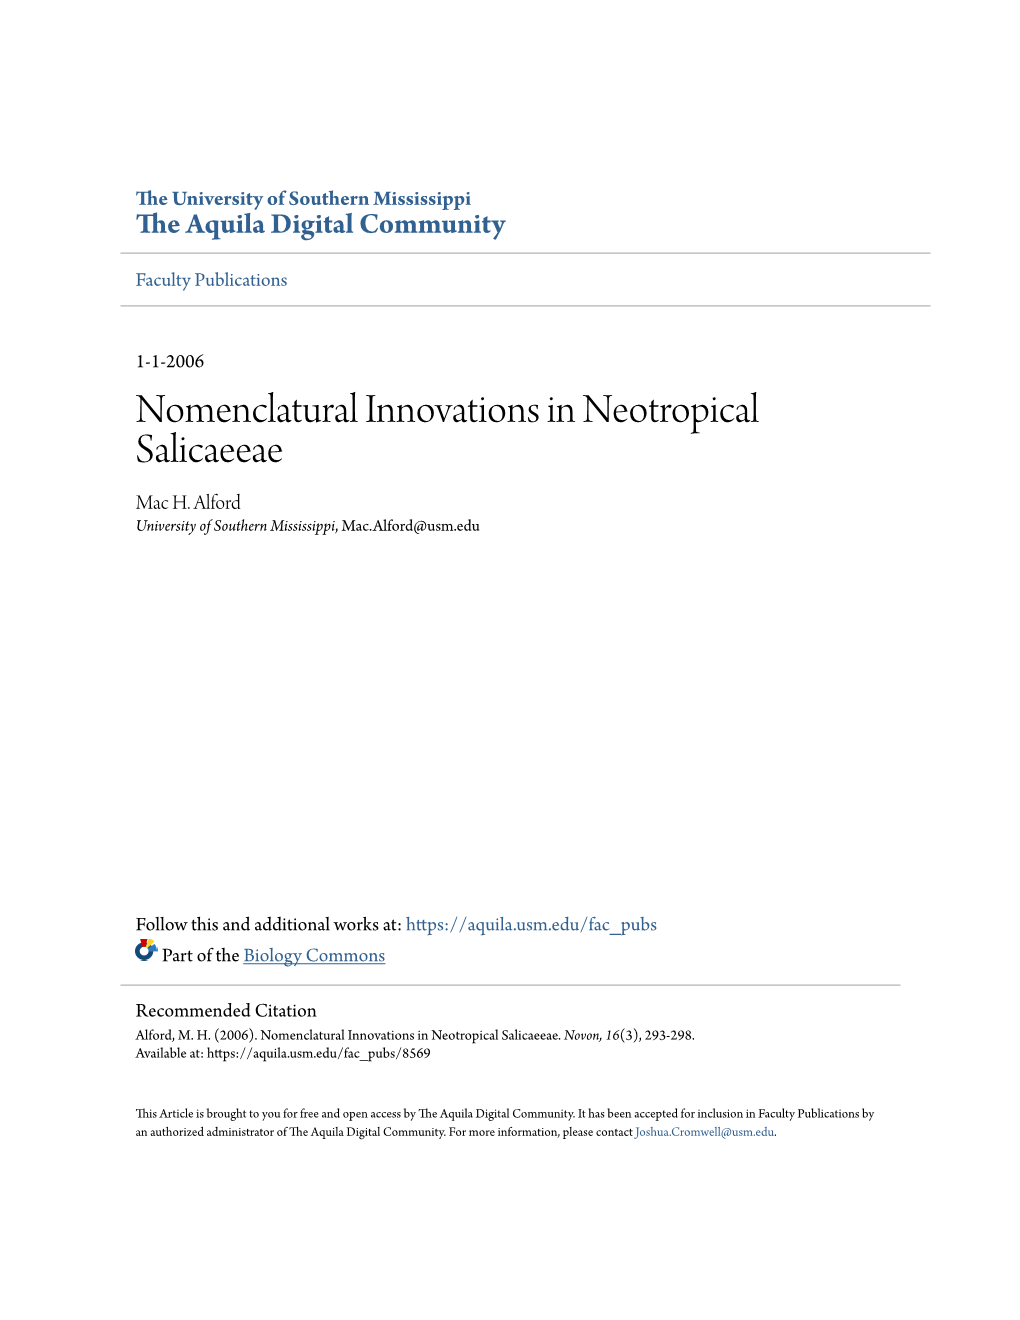 Nomenclatural Innovations in Neotropical Salicaeeae Mac H